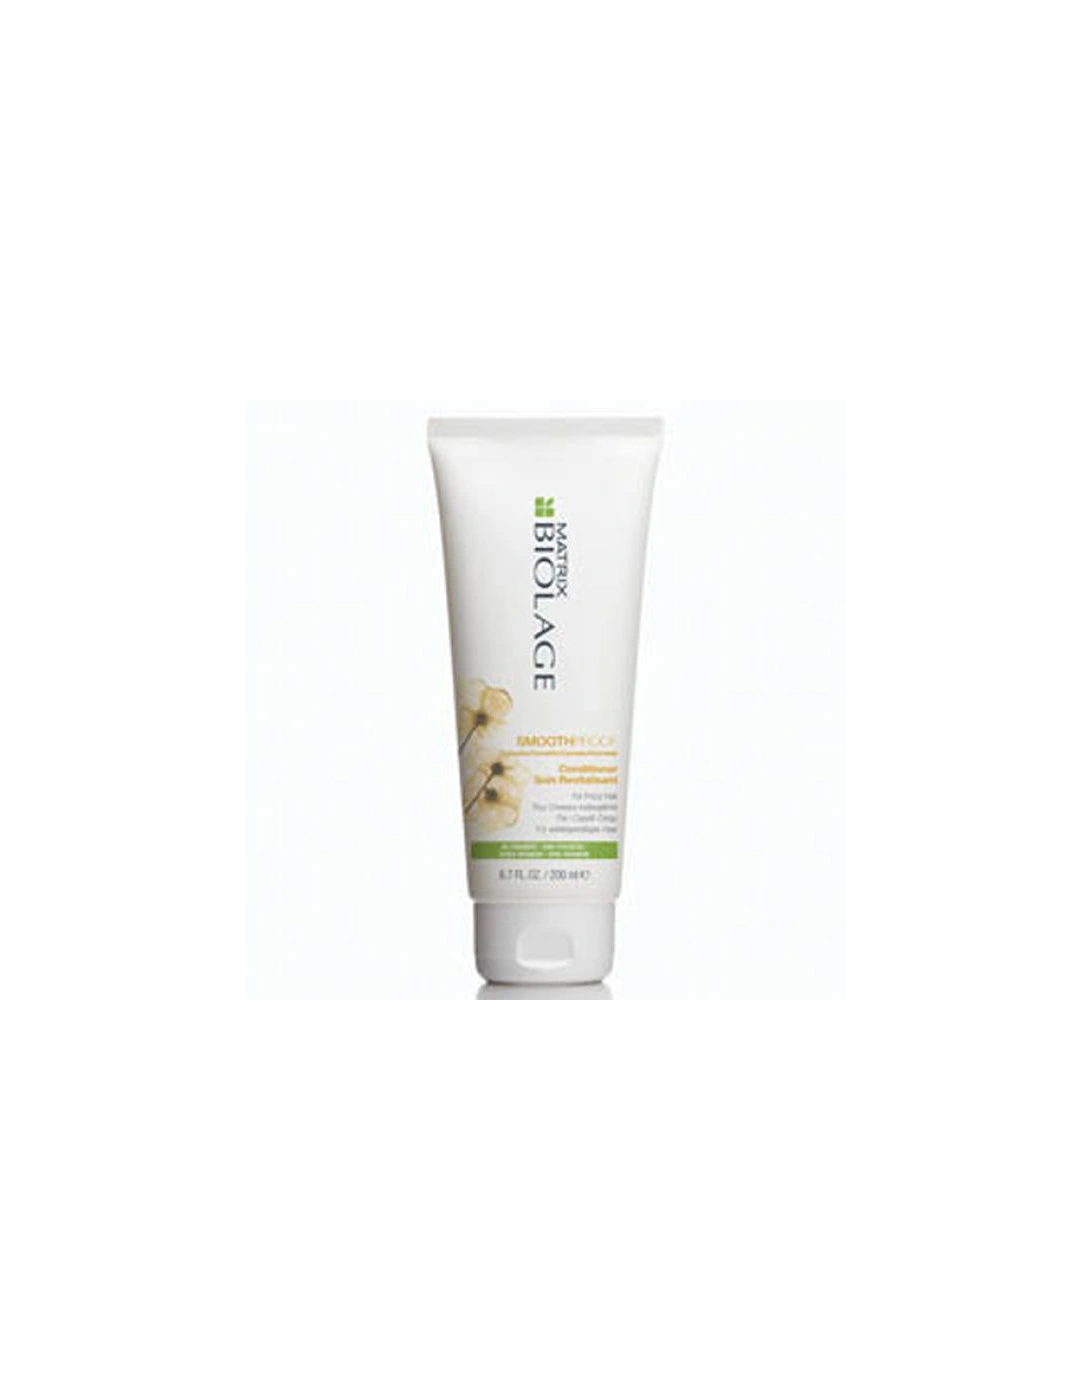 SmoothProof Conditioner for Smoothing Frizzy Hair 200ml - Biolage, 2 of 1